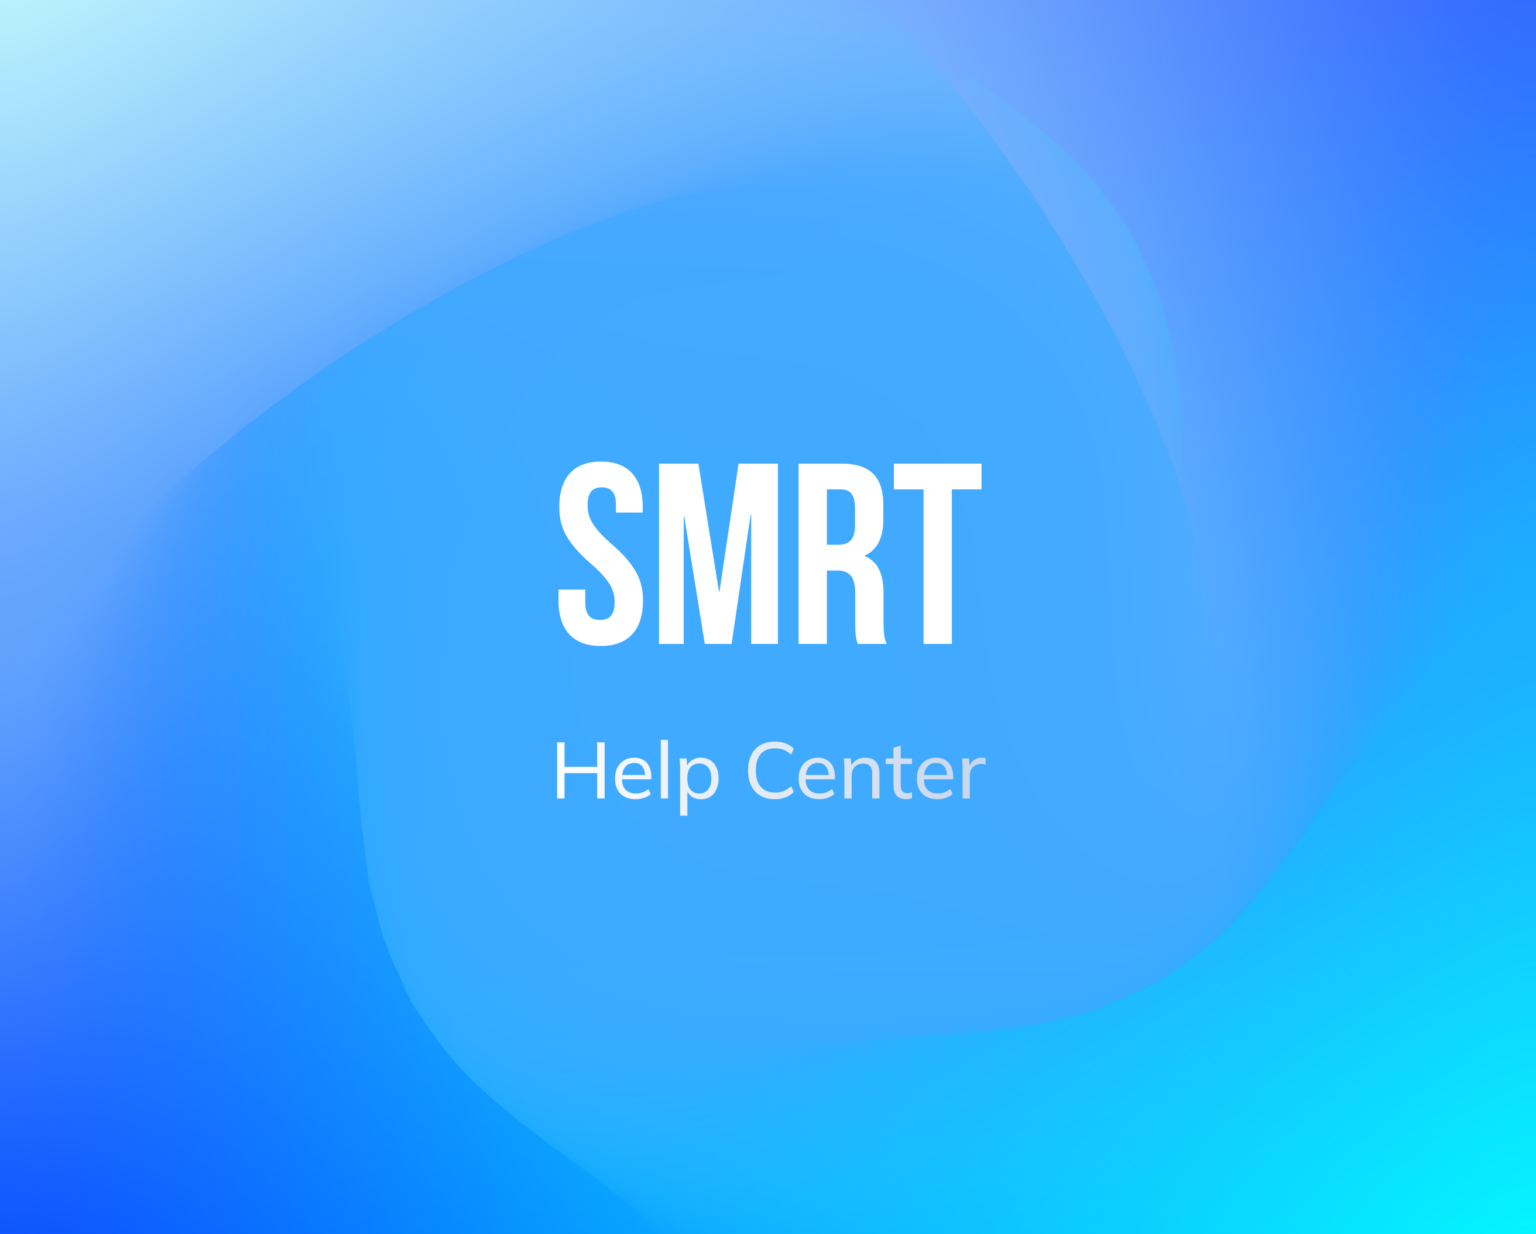 www.smrtsystems.com/contact-us/